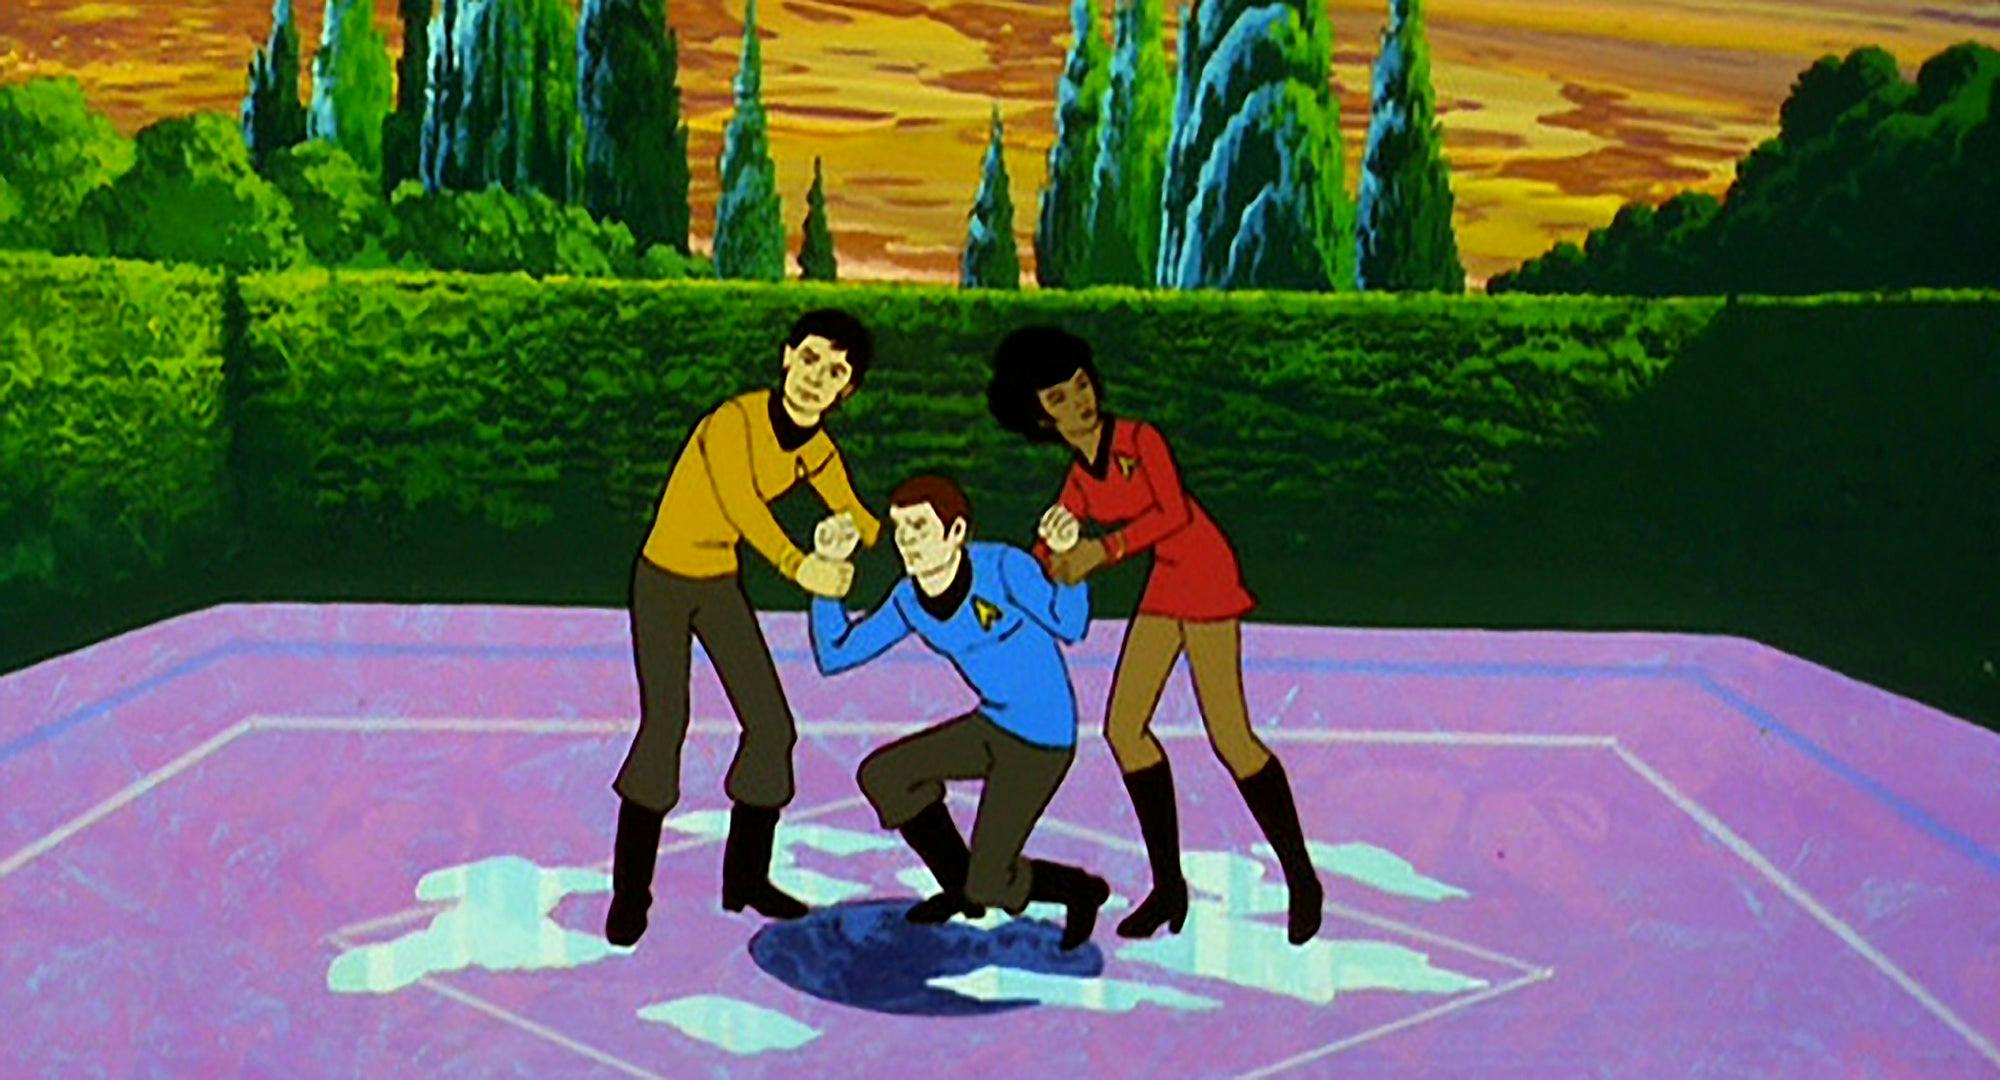 Sulu and Uhura offer aid in lifting McCoy up after enduring a prank in the rec room in 'The Practical Joker'